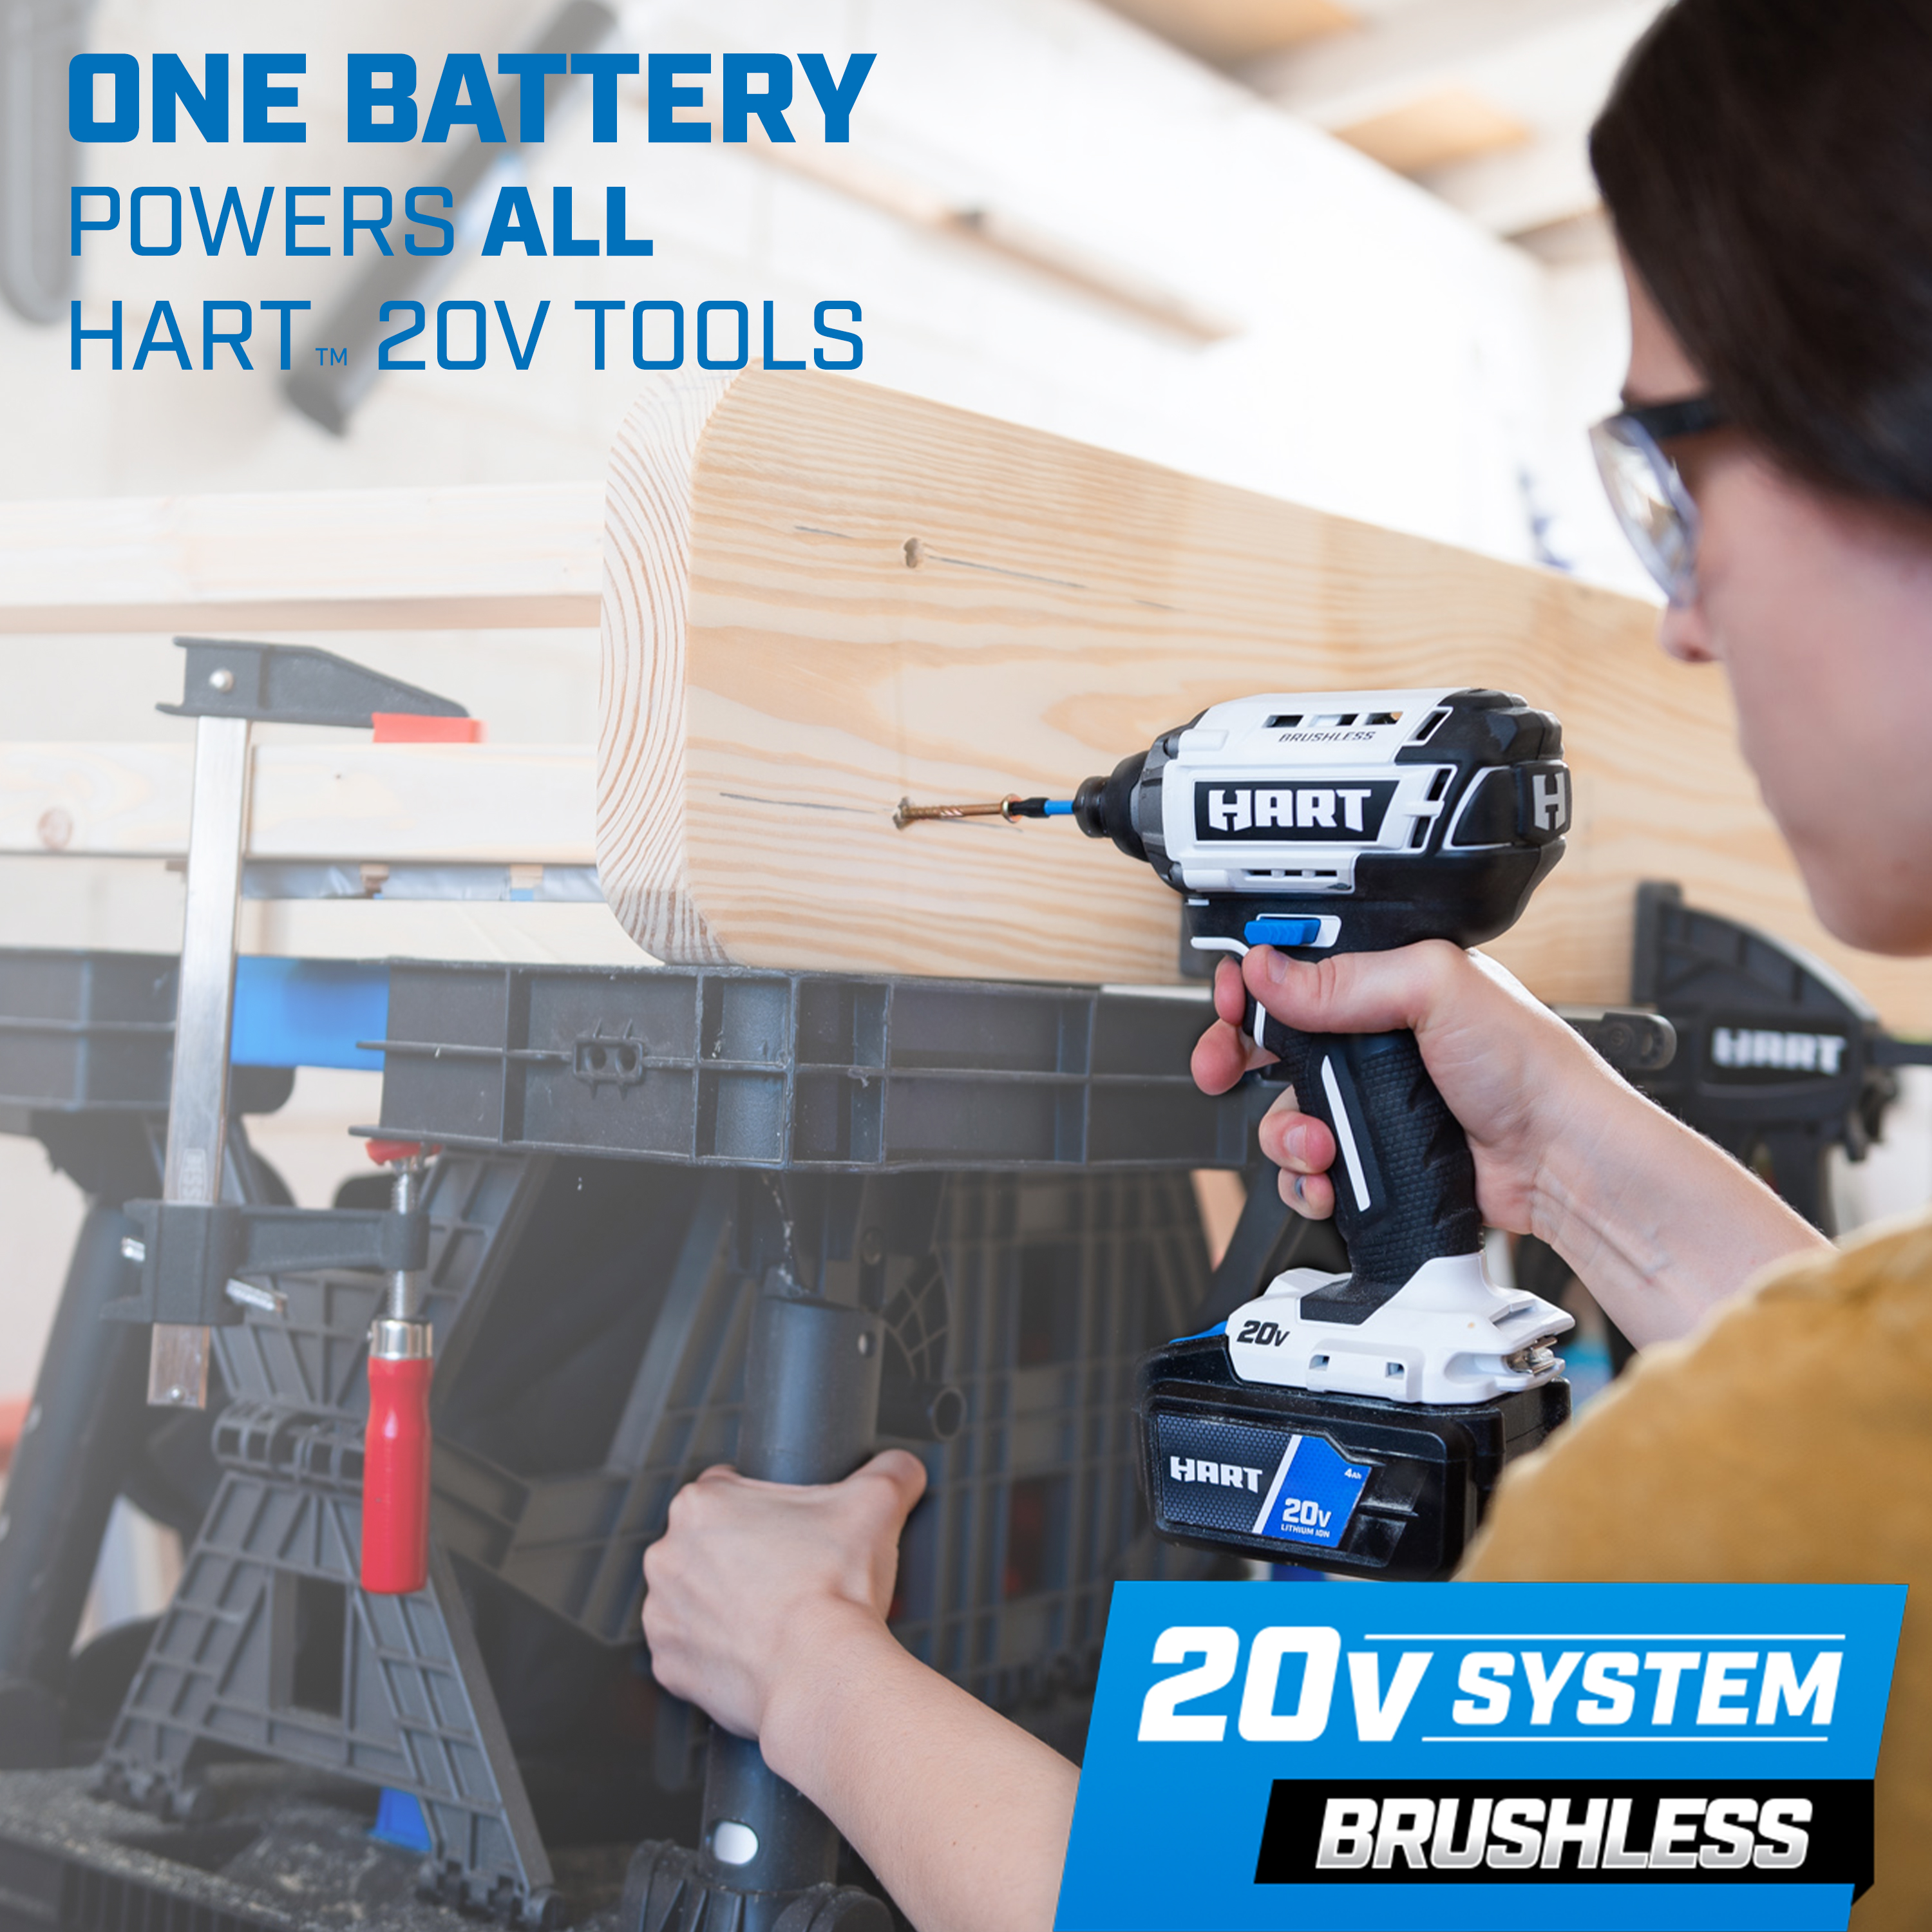 one battery powers all hart 20v tools